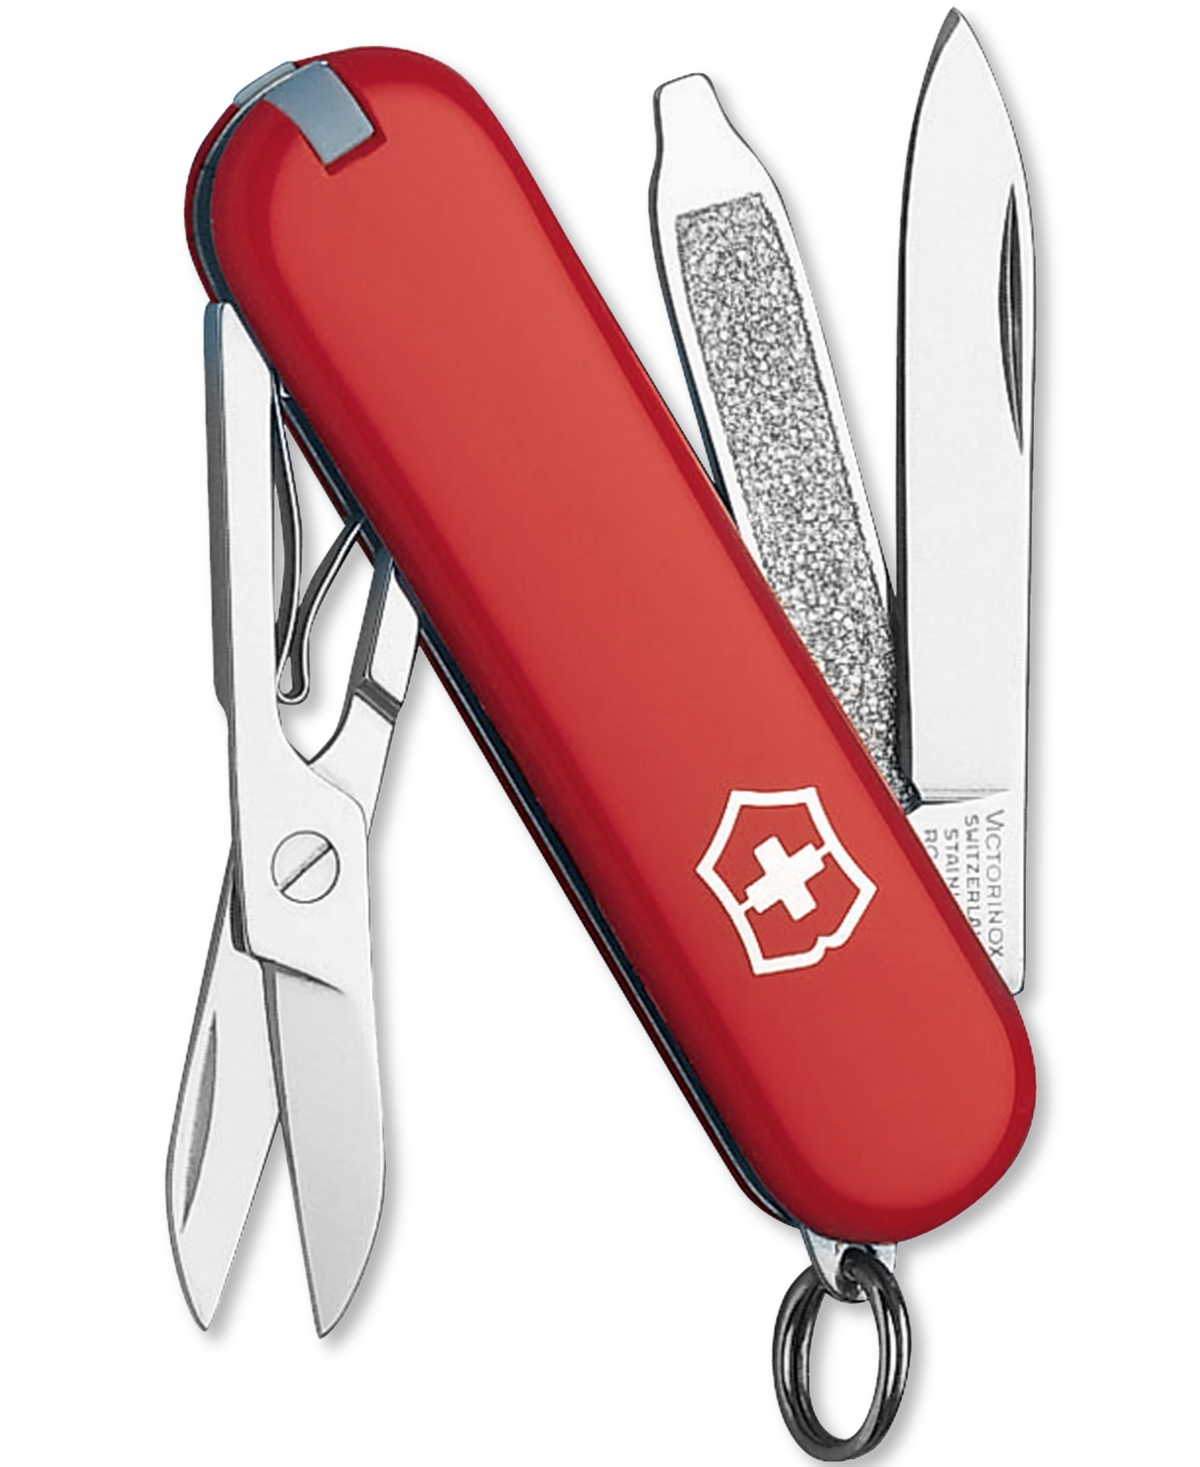 Victorinox Swiss Army Classic Sd Pocket Knife In Vx Red